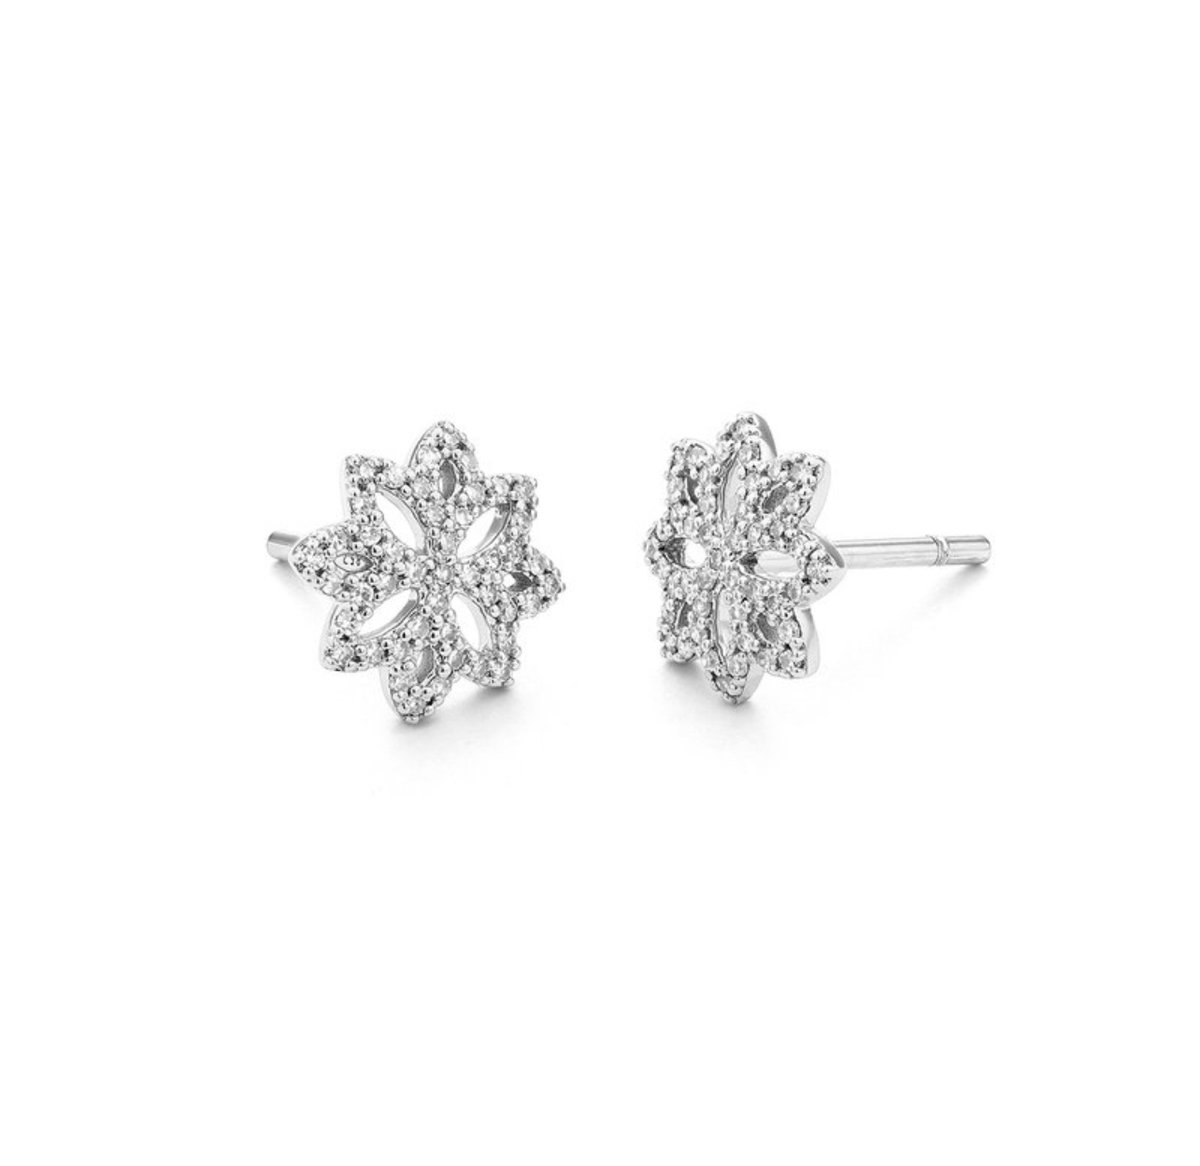 Facet Barcelona 14K Floral Design Yellow Gold Diamond Earrings
# E0140B50
14k yellow gold floral diamond earrings, set with approximately 0.25ct tw of round brilliant diamonds.
.
nfoxjewelers.com/catalog/facet-…
.
#Diamonds #Floral #Earringsoftheweek #NFoxJewelers #SaratogaSprings